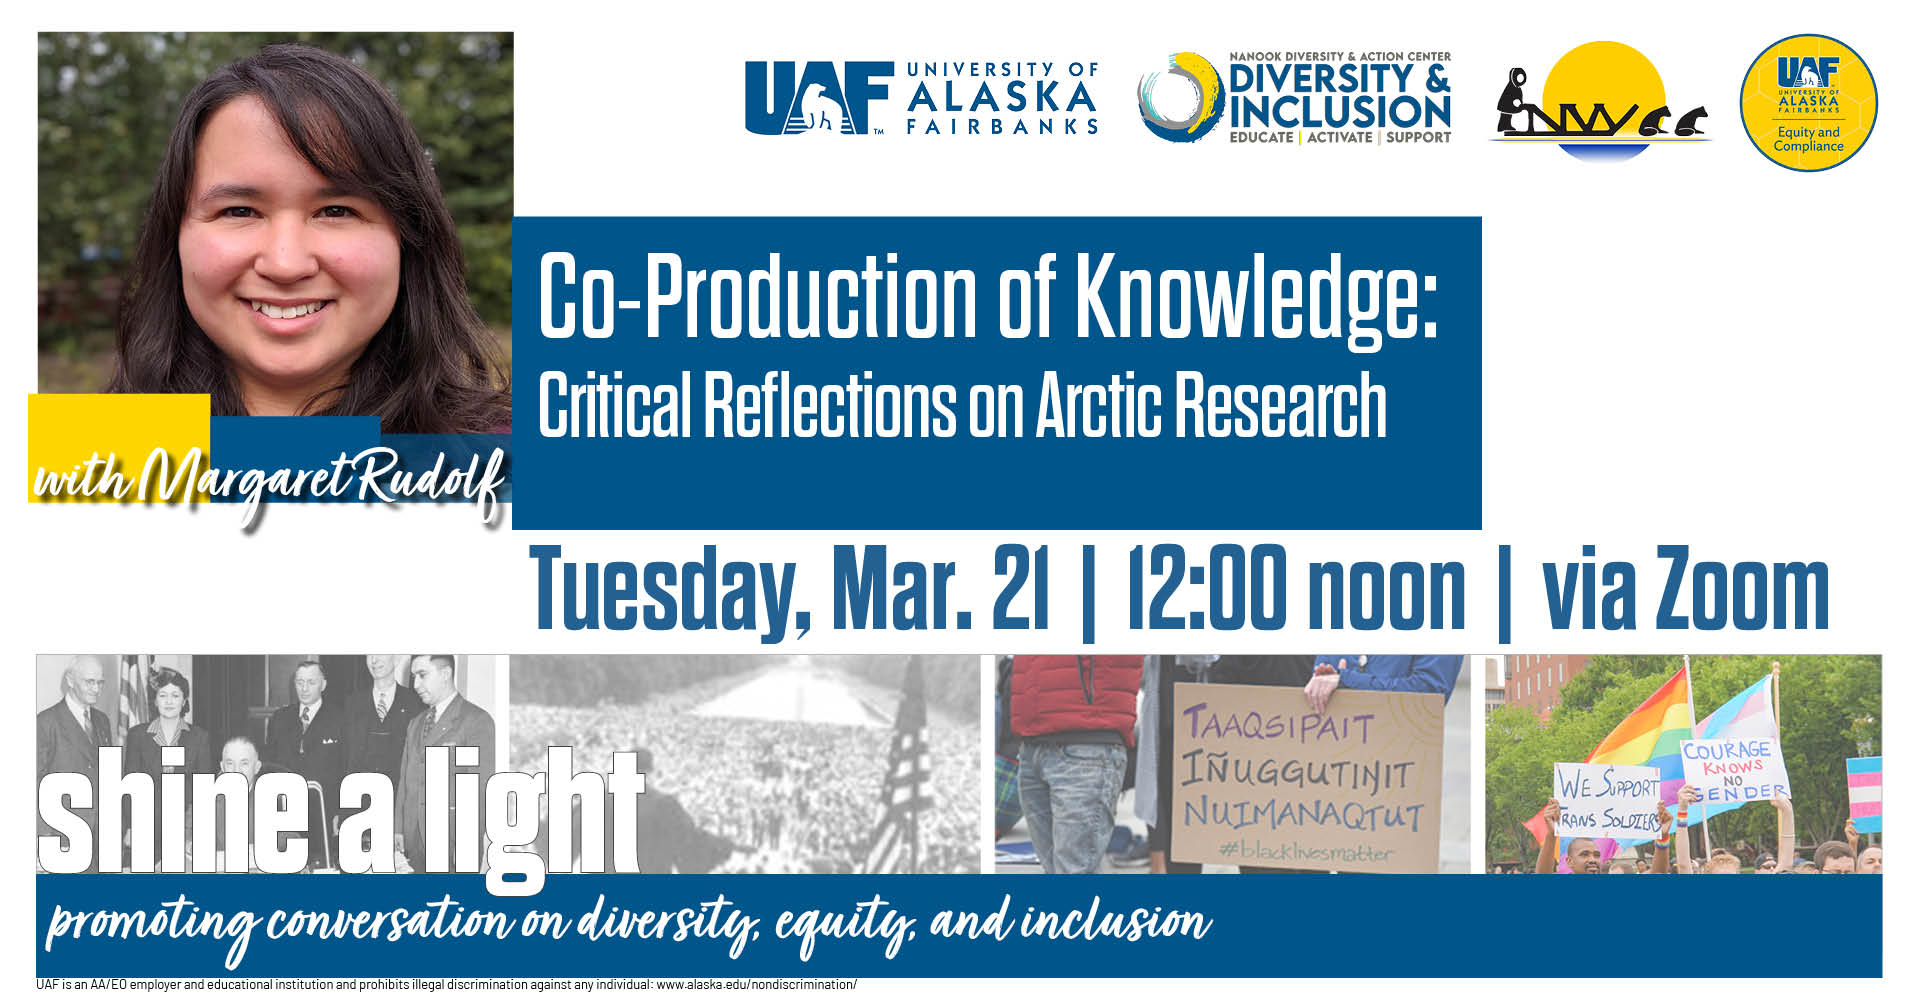 Co-Production of Knowledge: Critical Reflection on Arctic Research Flyer